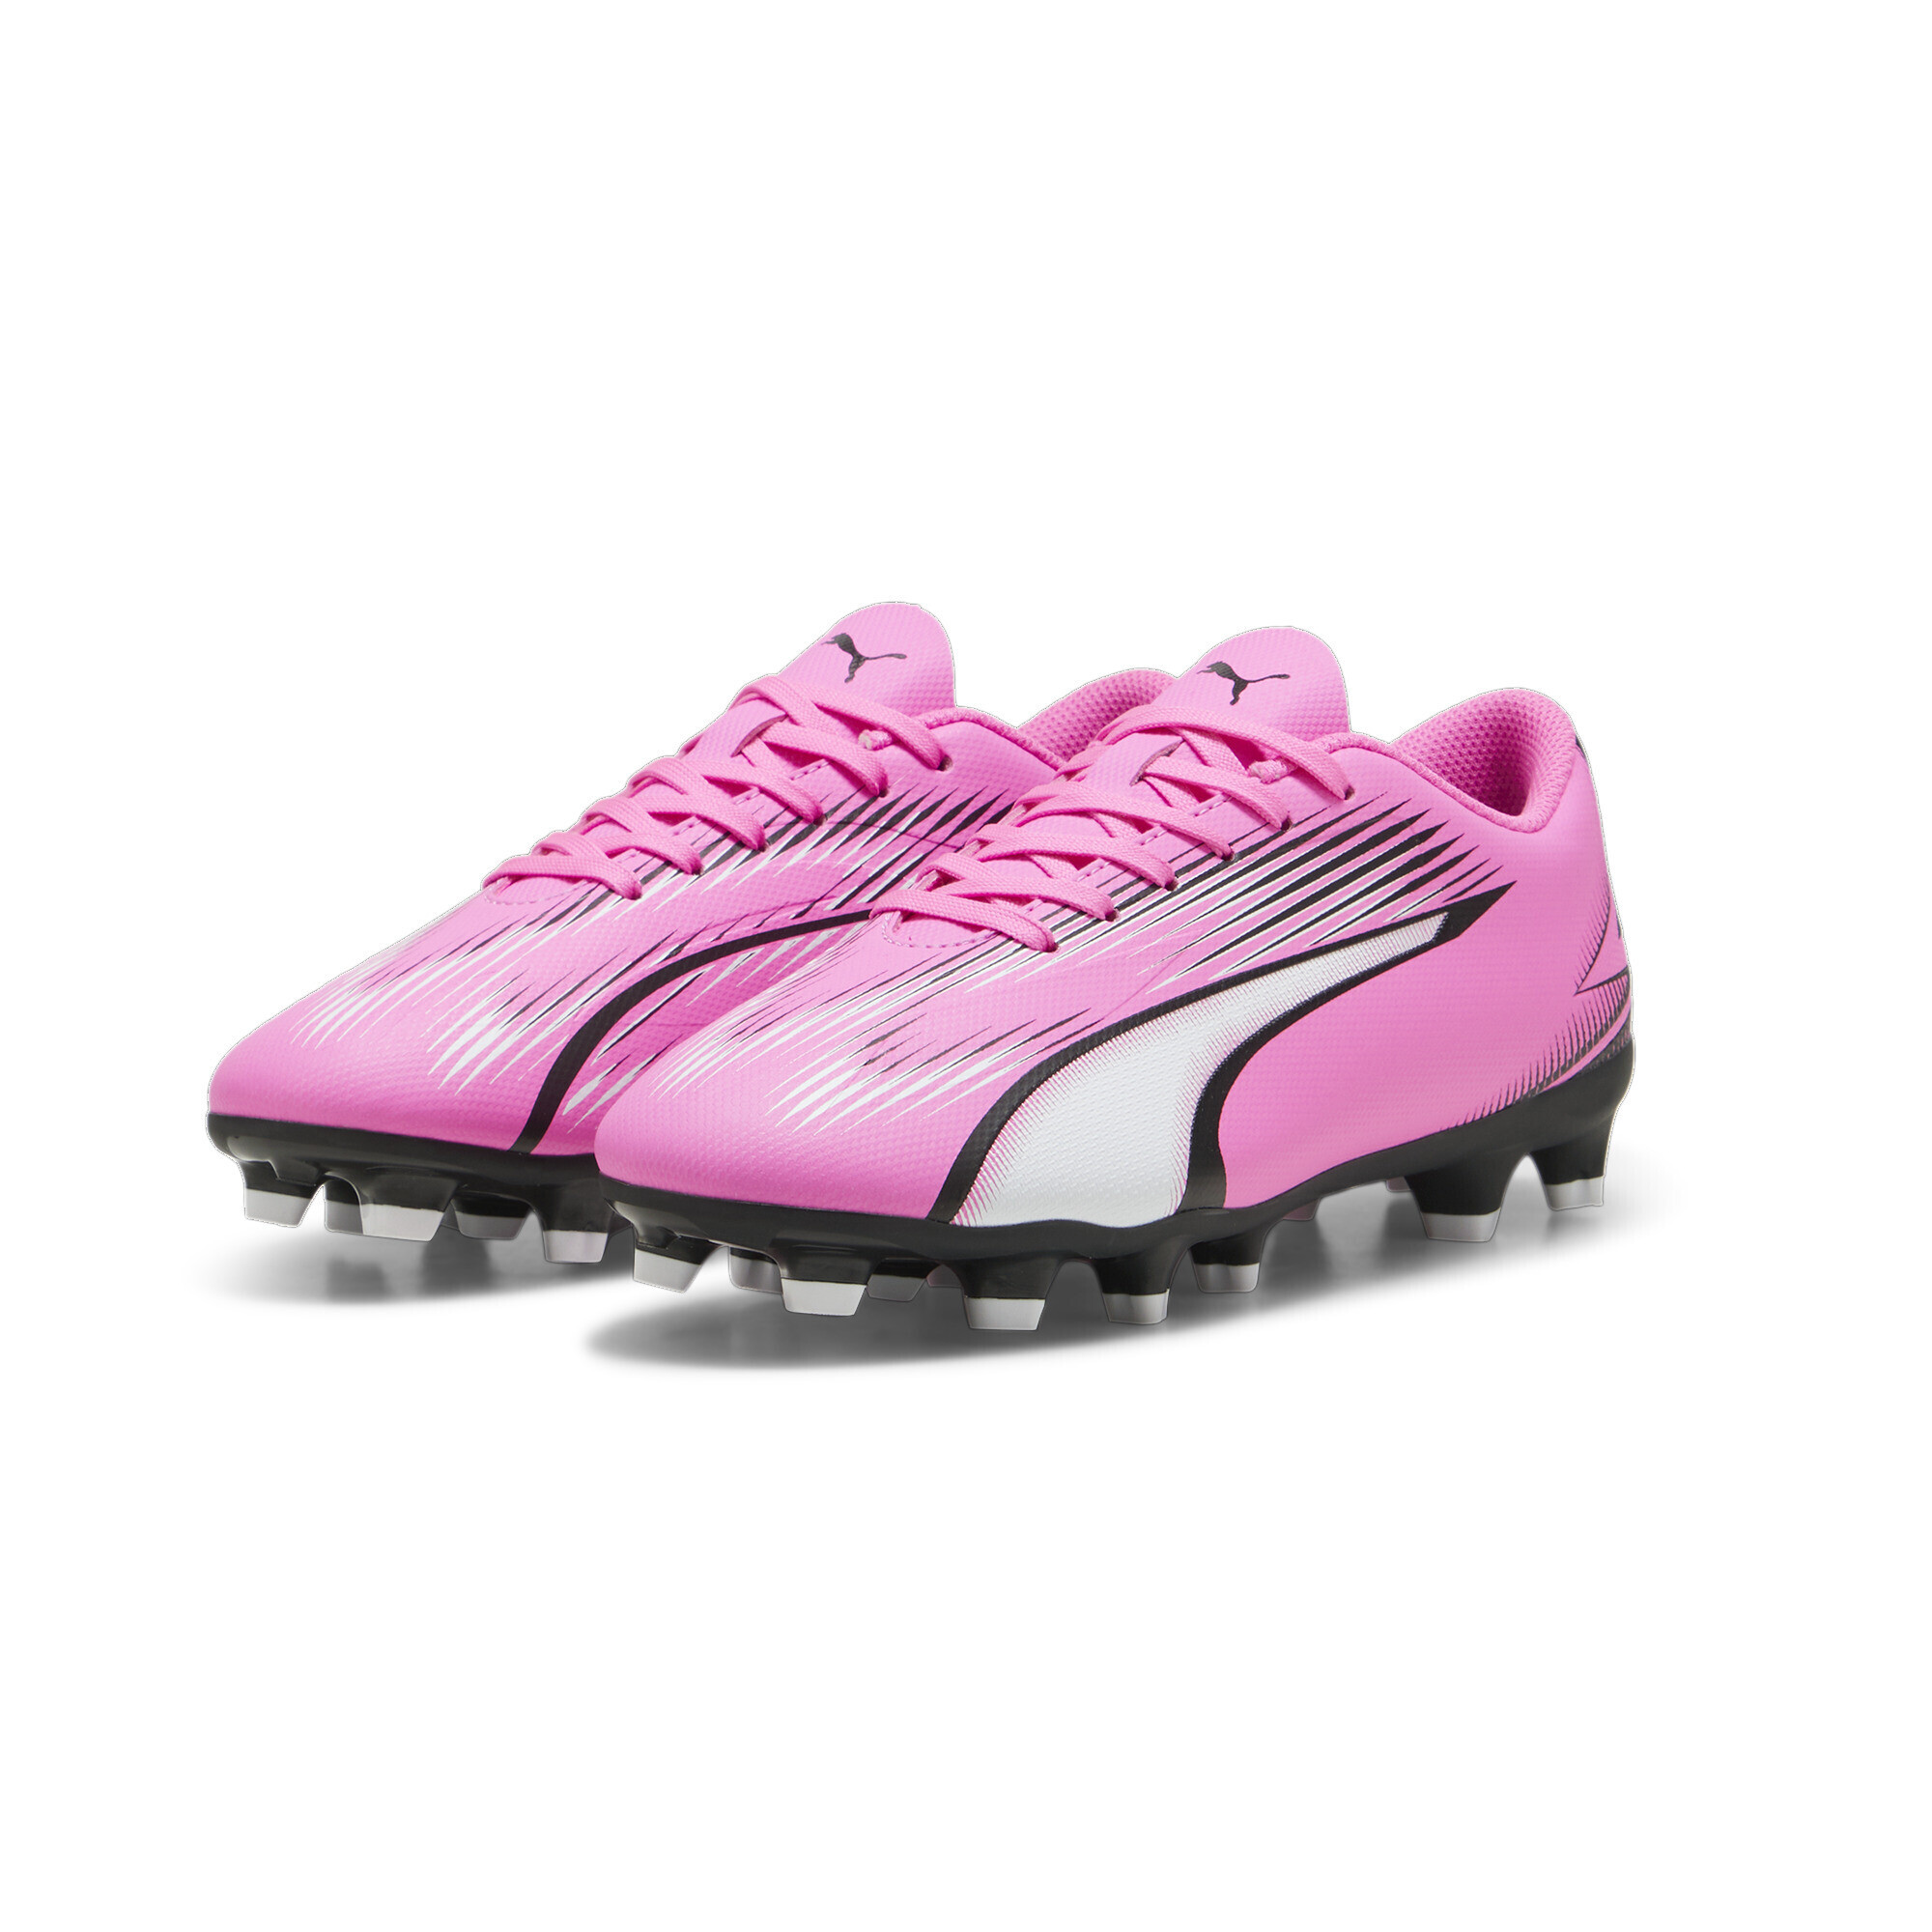 PUMA ULTRA PLAY FG/AG Youth Football Boots In Pink, Size EU 32